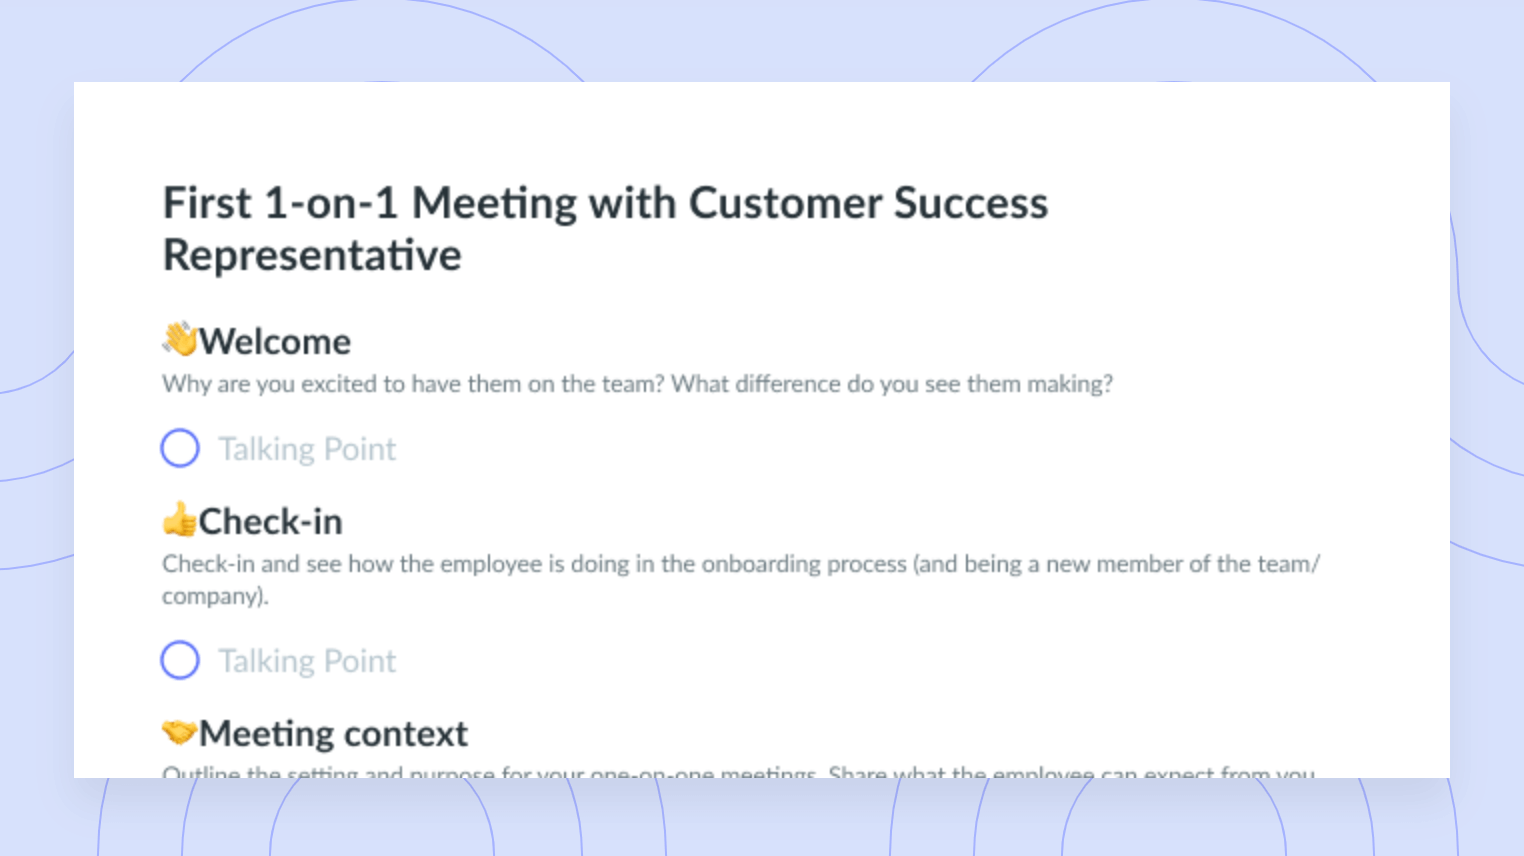 First 1-on-1 Meeting with Customer Success Representative